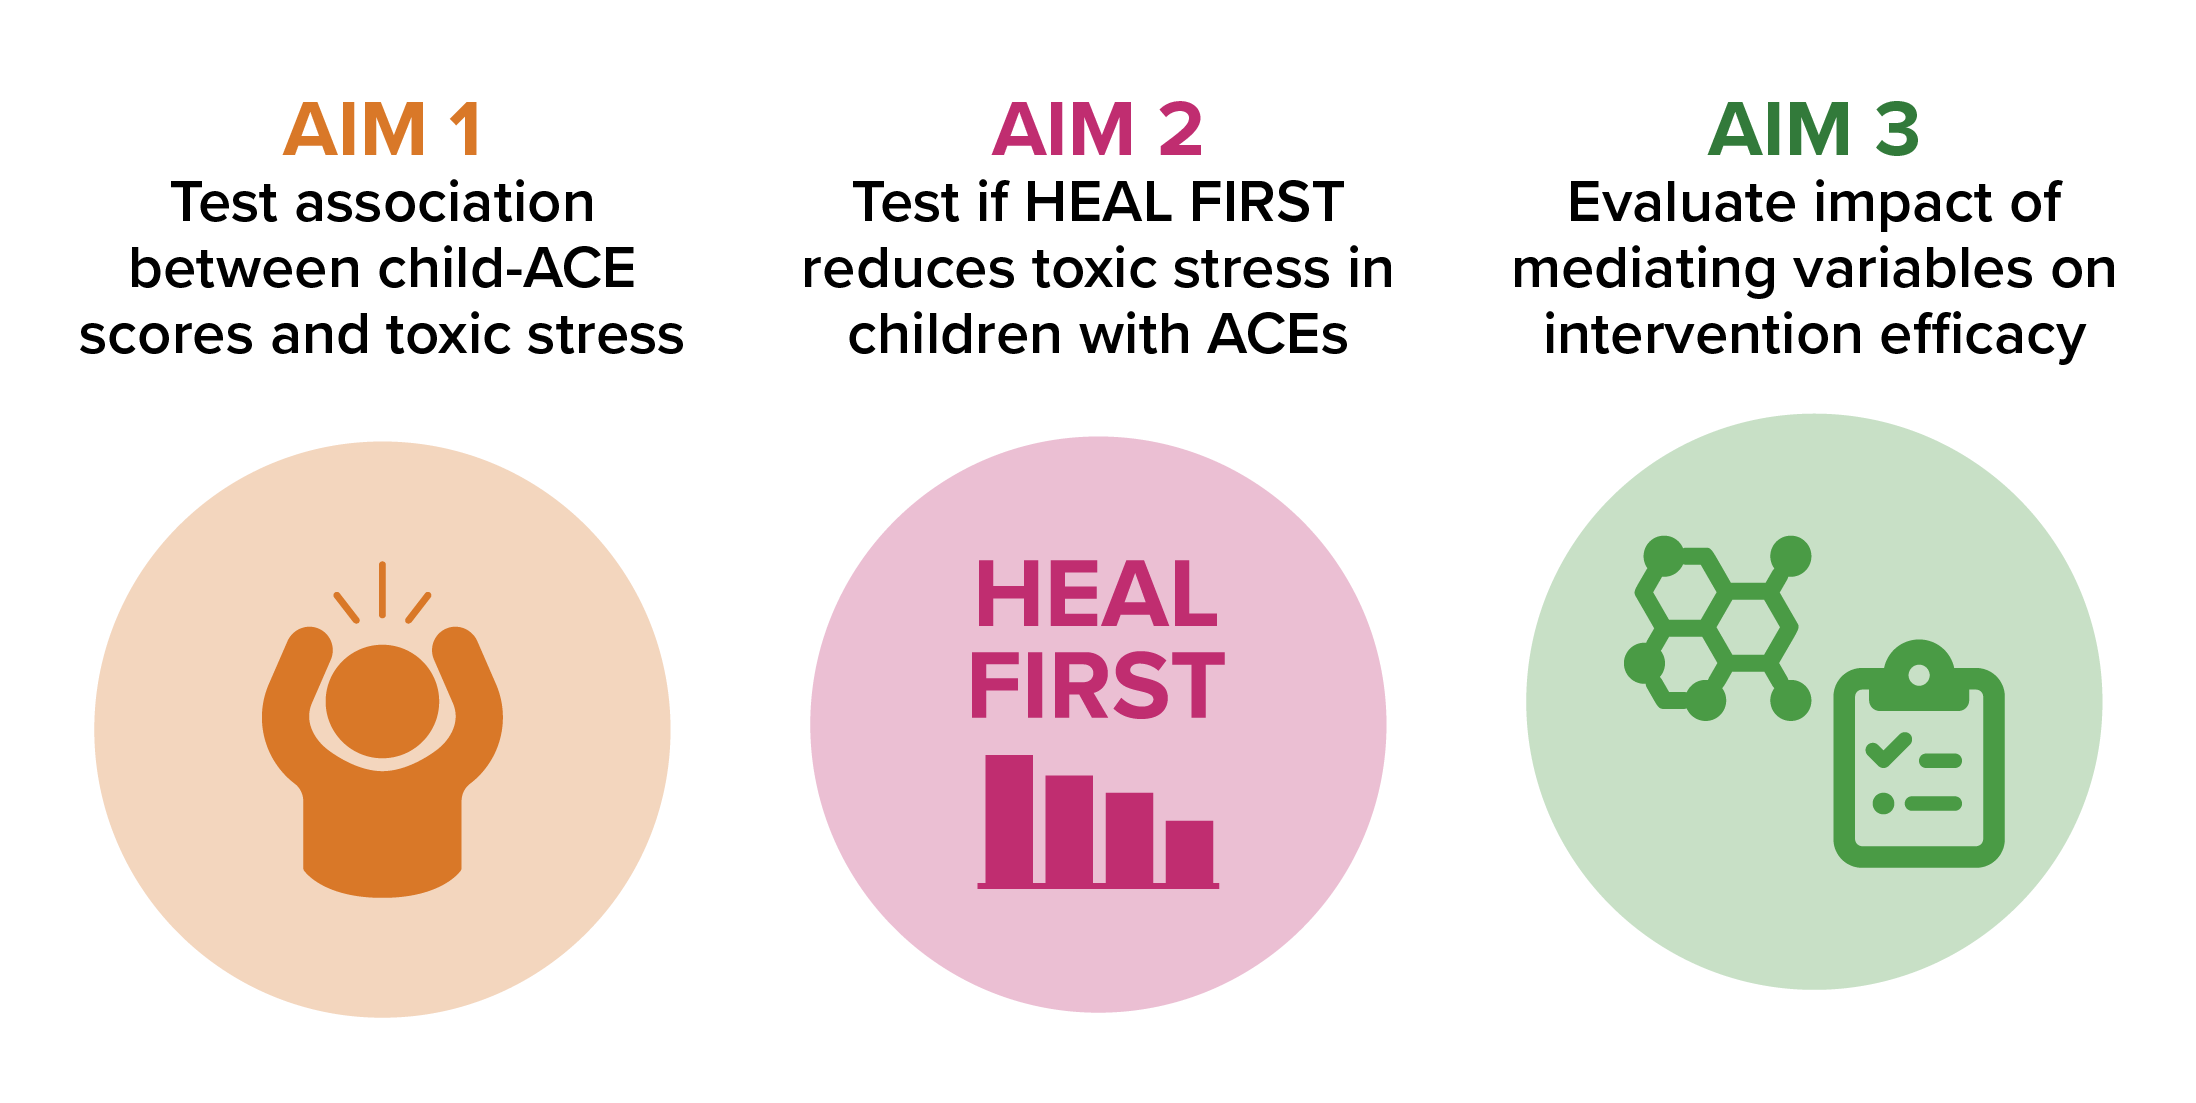 An image of three AIM goals. AIM 1: Test association between child-ACE sores and toxic stress. AIM 2: Test if HEAL FIRST reduces toxic stress in children with ACEs. AIM 3: Evaluate impact of mediating variables on intervention efficacy.